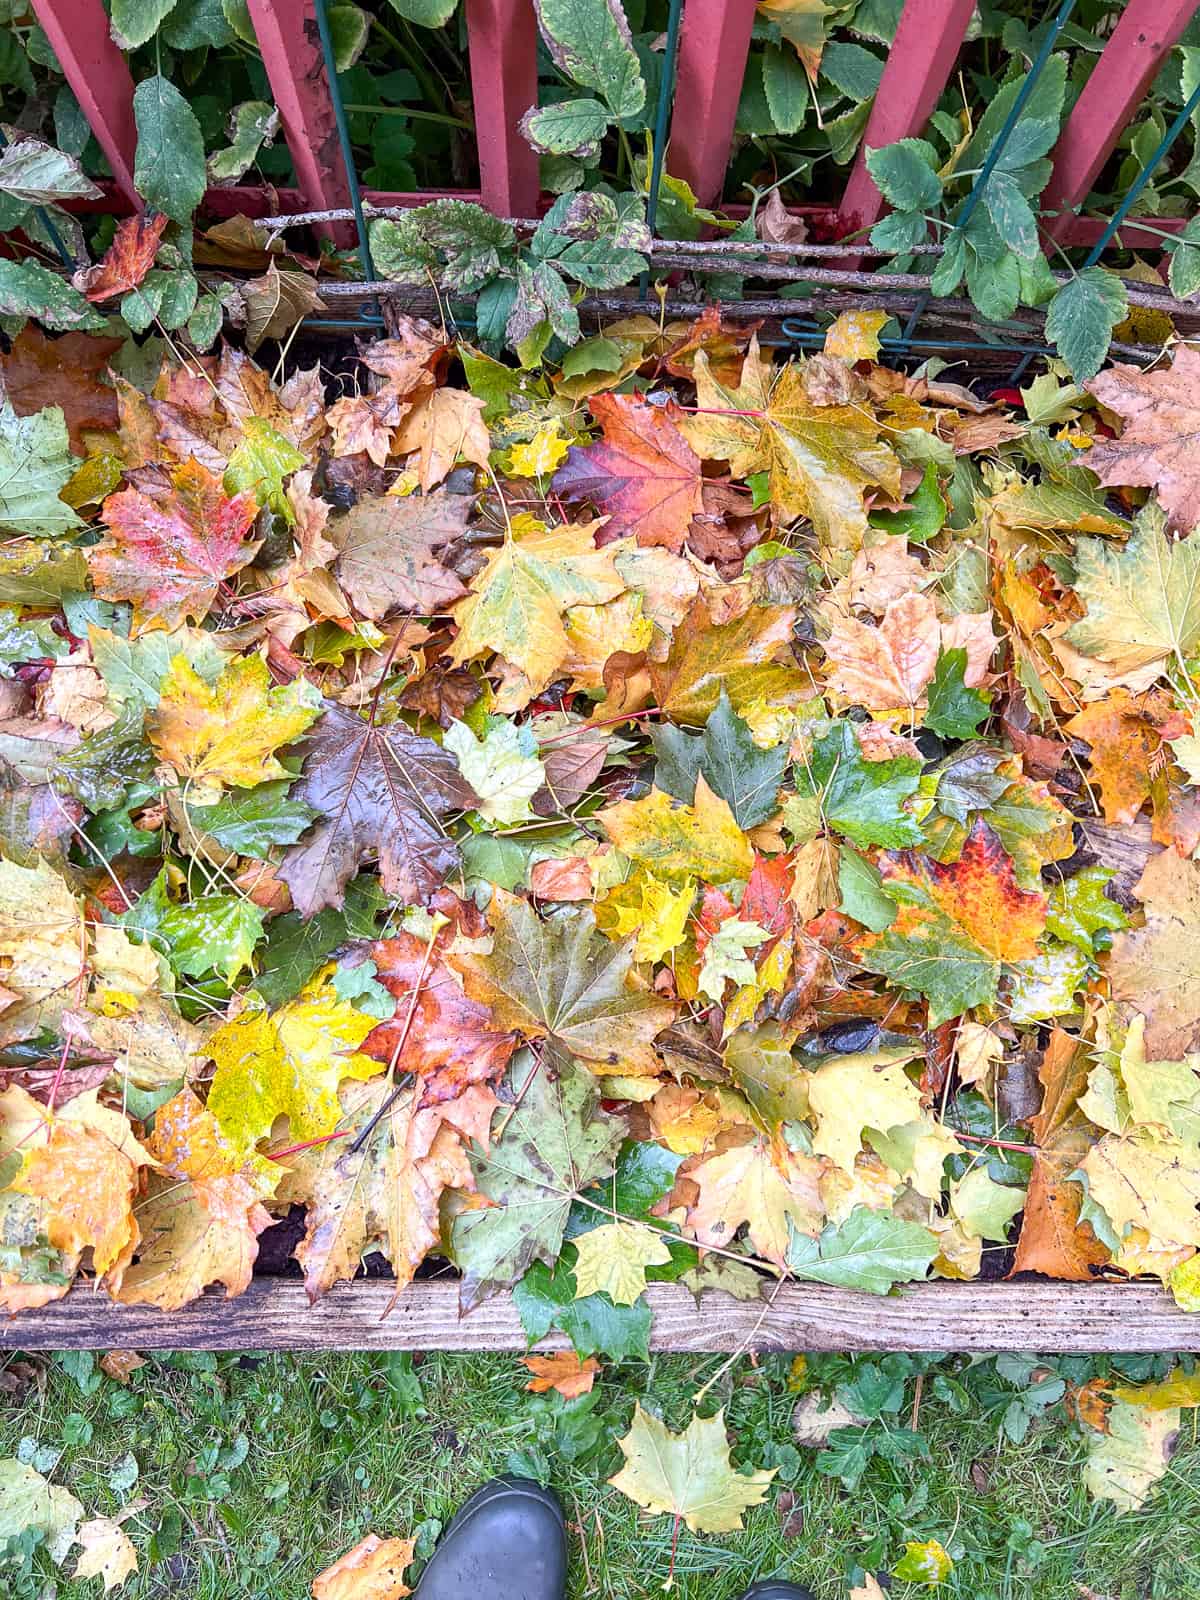 An image of leaves mounded on a raised bed, during seasonal garden maintenance.